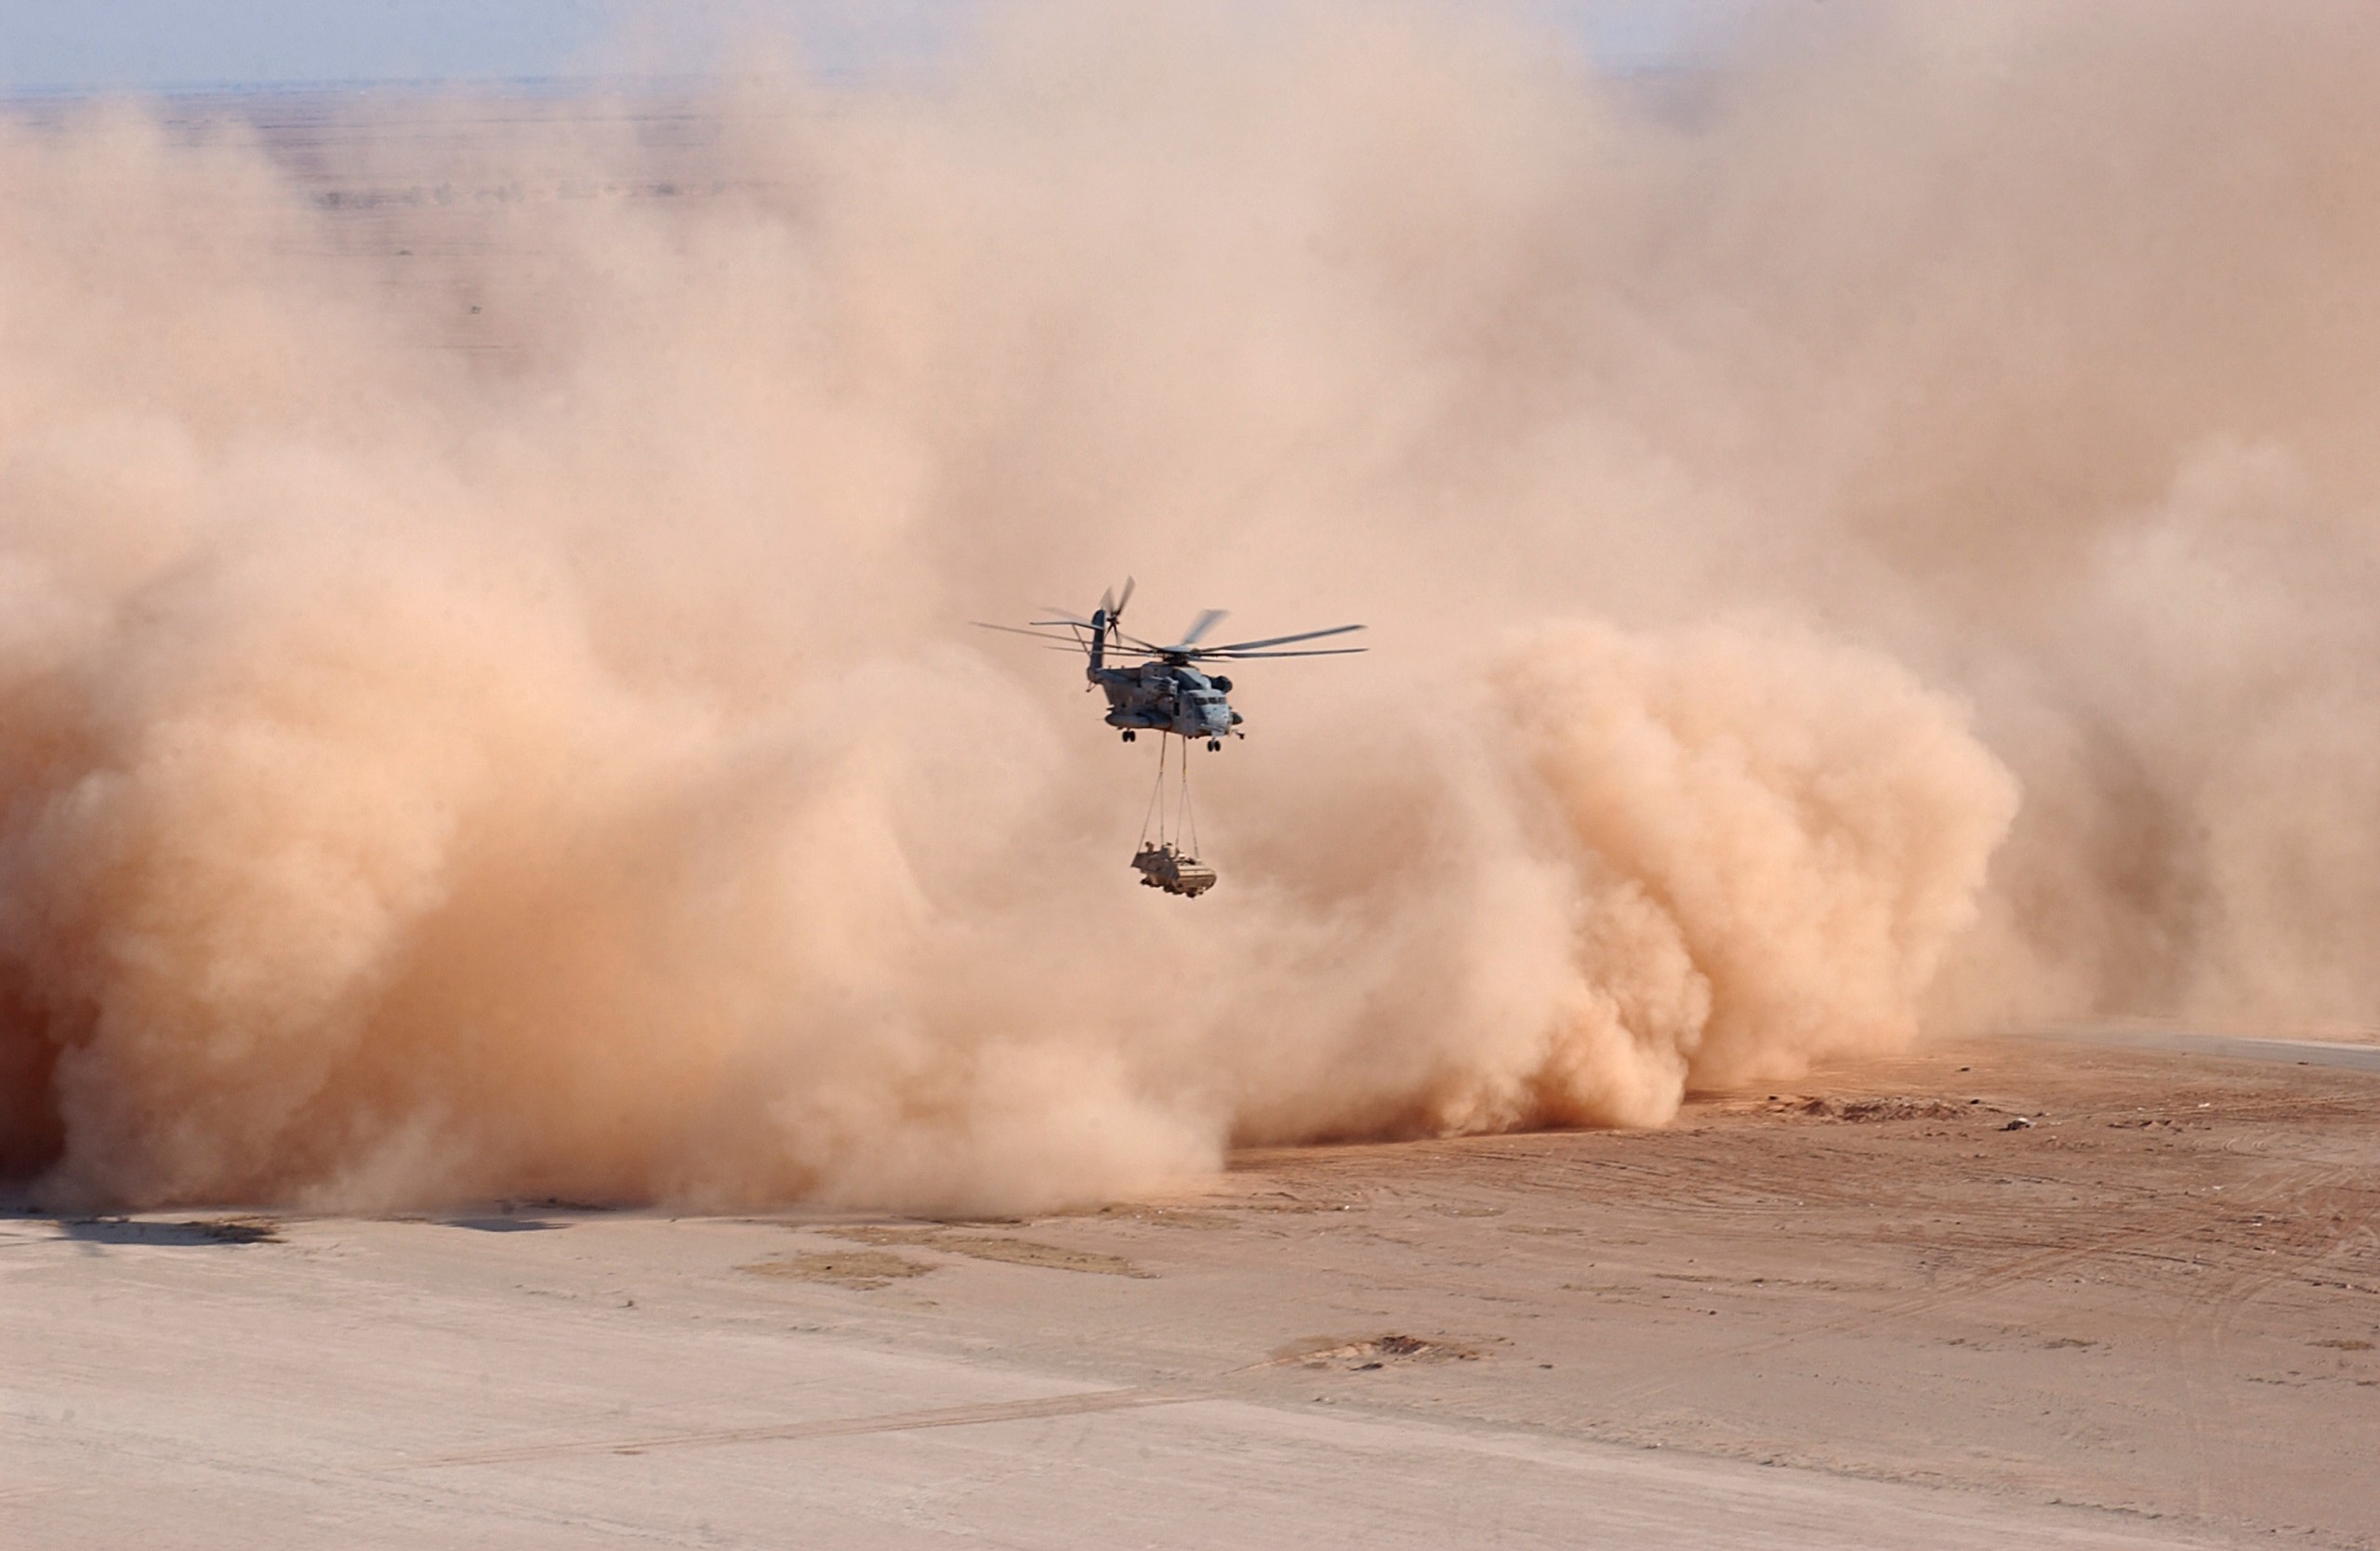 military, helicopters, dust, vehicles - desktop wallpaper